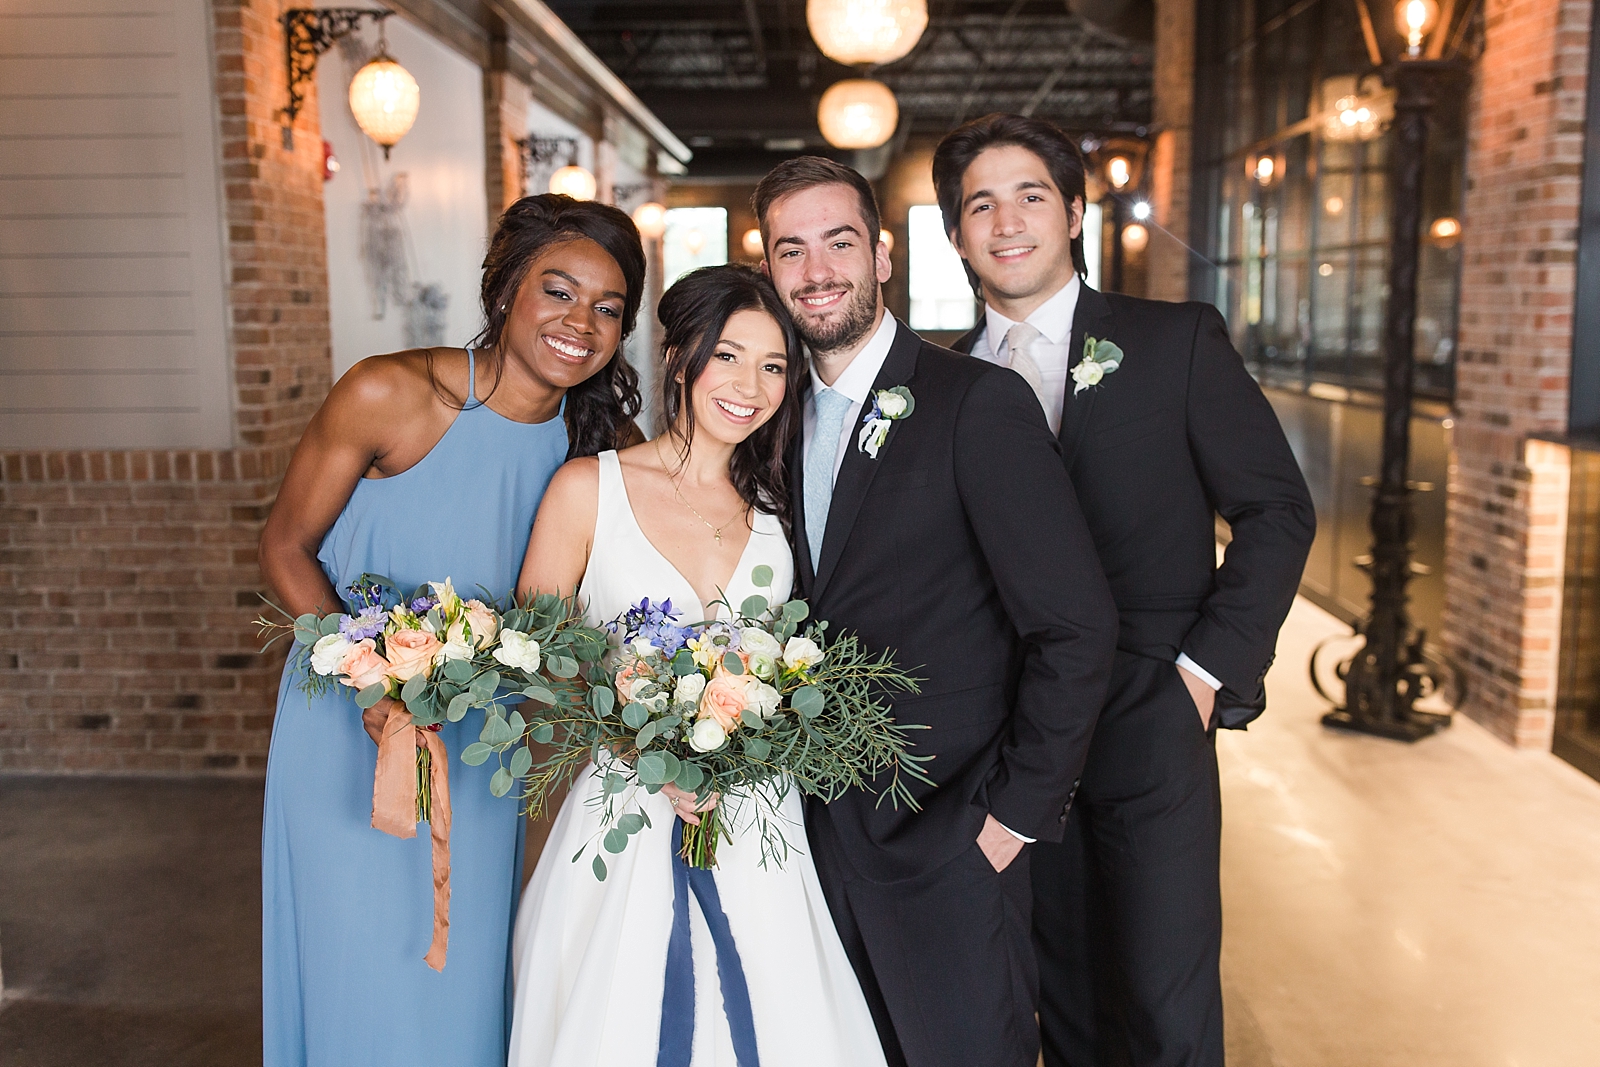 Glover Park Brewery Wedding Bridal Party in venue smiling at camera Photo